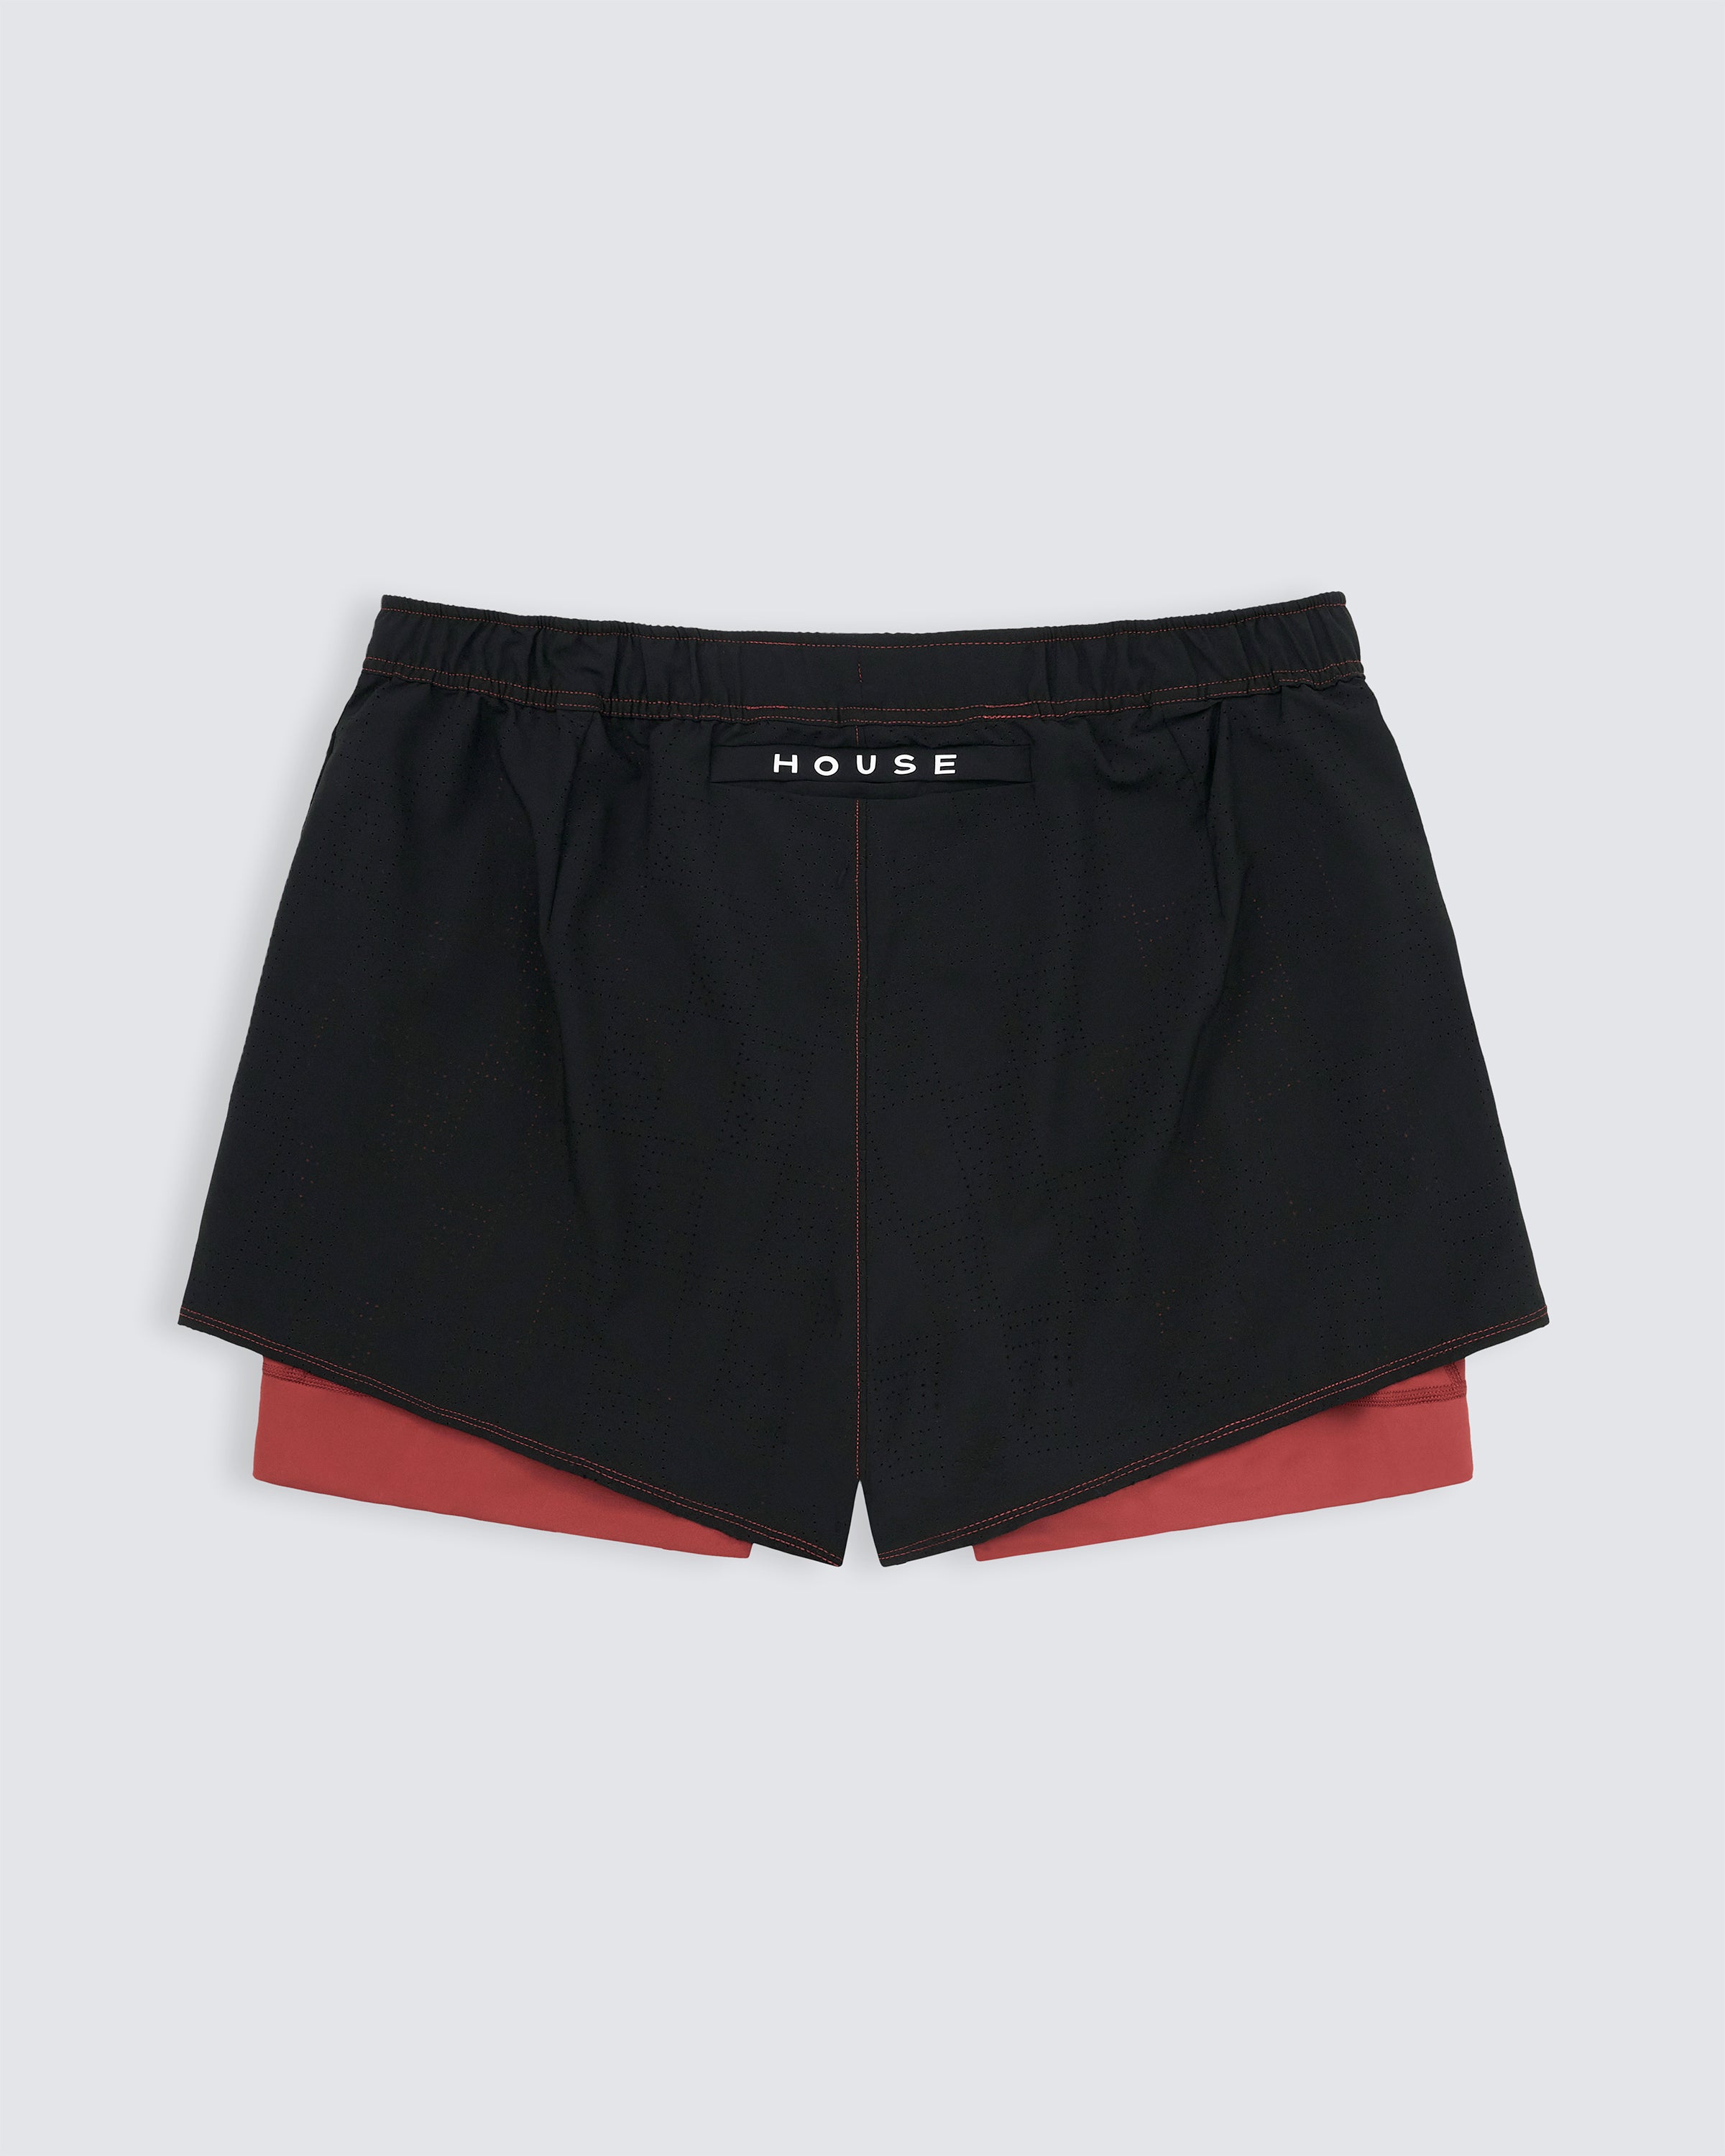 Sports shorts in black and red